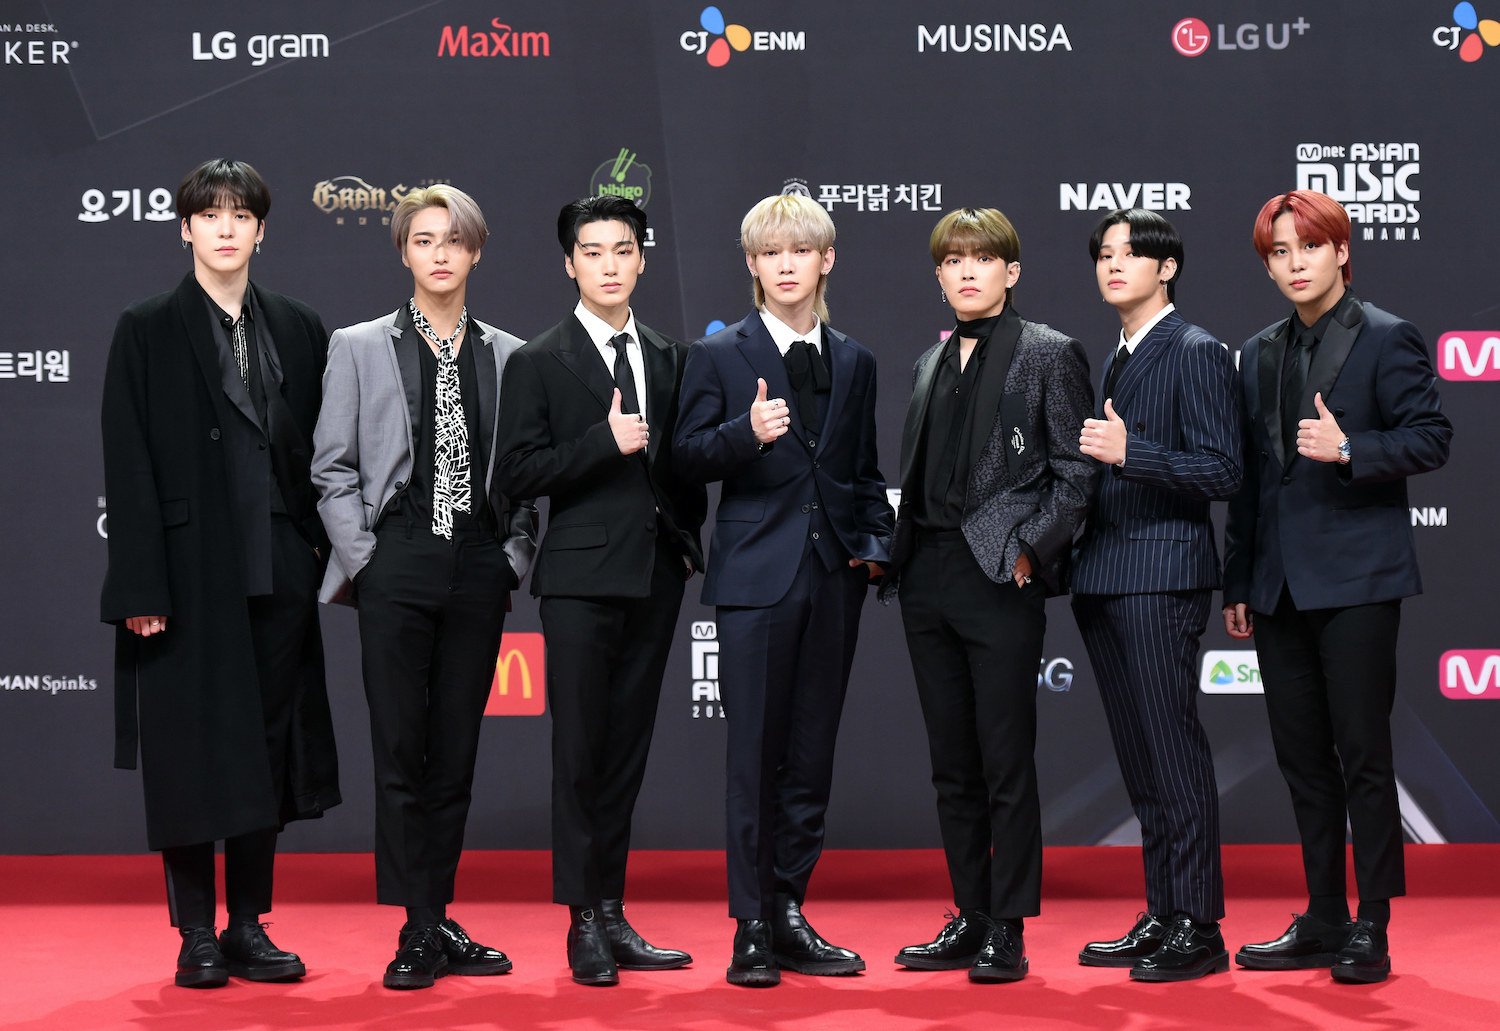 ATEEZ, wearing suits, attends the 2020 Mnet Asian Music Awards